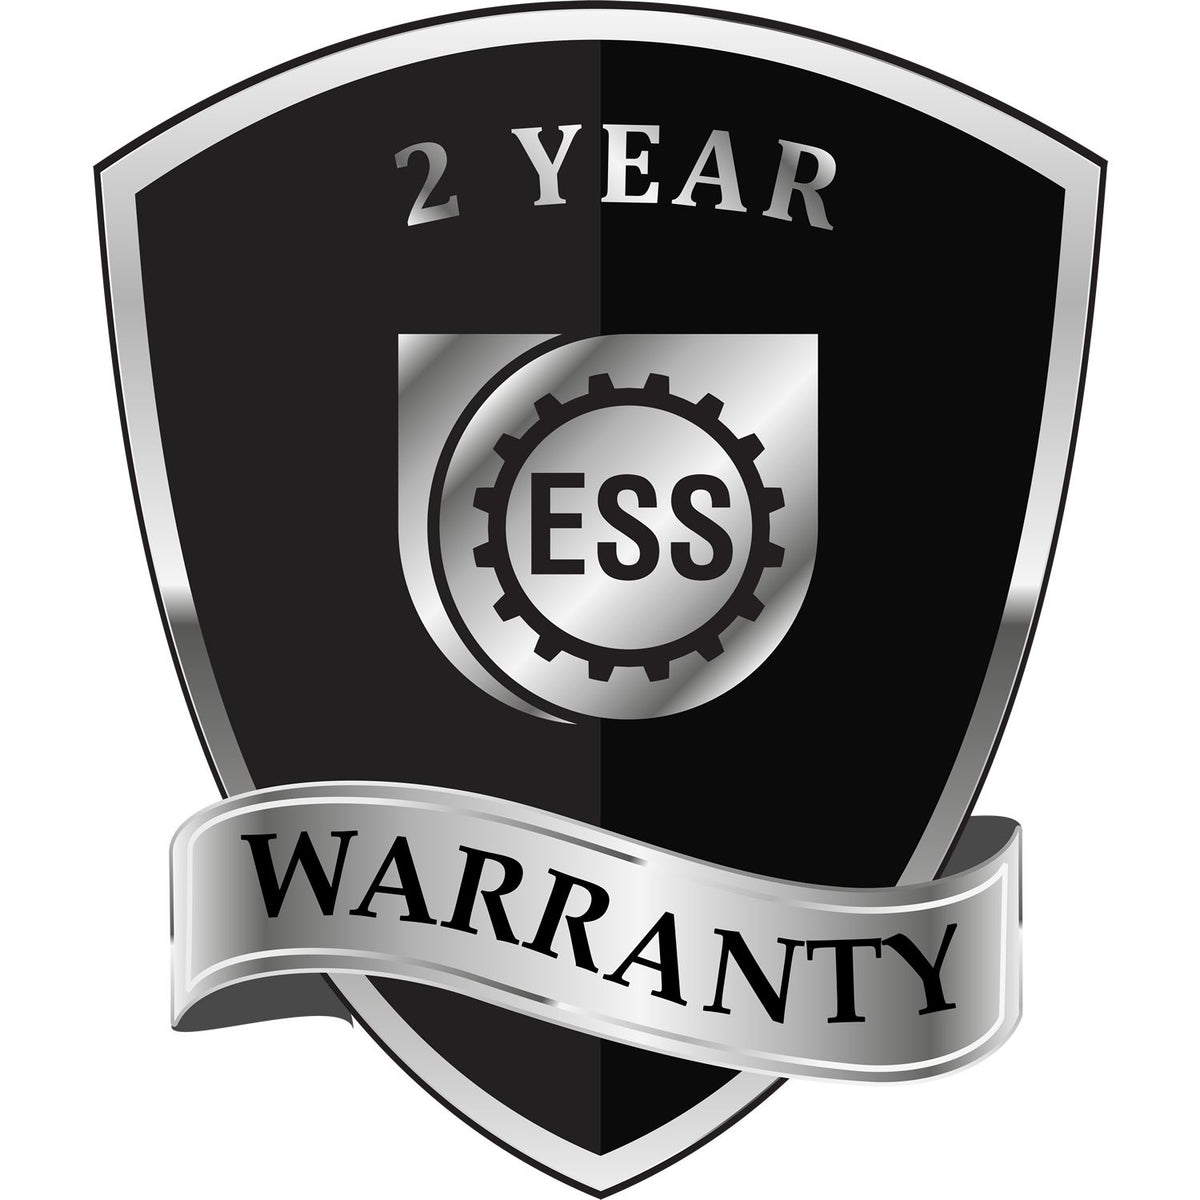 A black and silver badge or emblem showing warranty information for the Gift North Carolina Geologist Seal